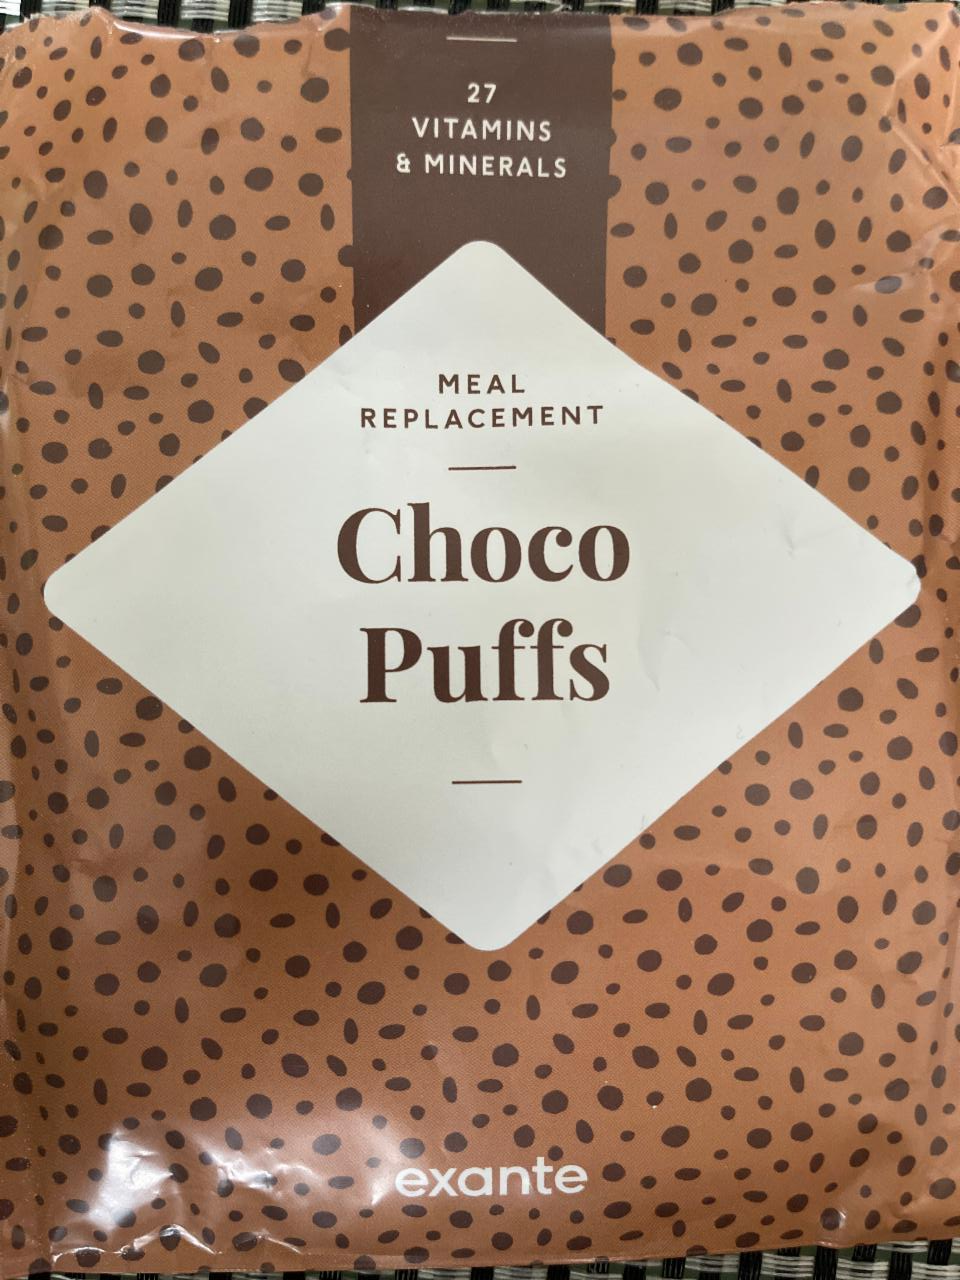 Fotografie - Meal Replacement Choco Puffs Exante